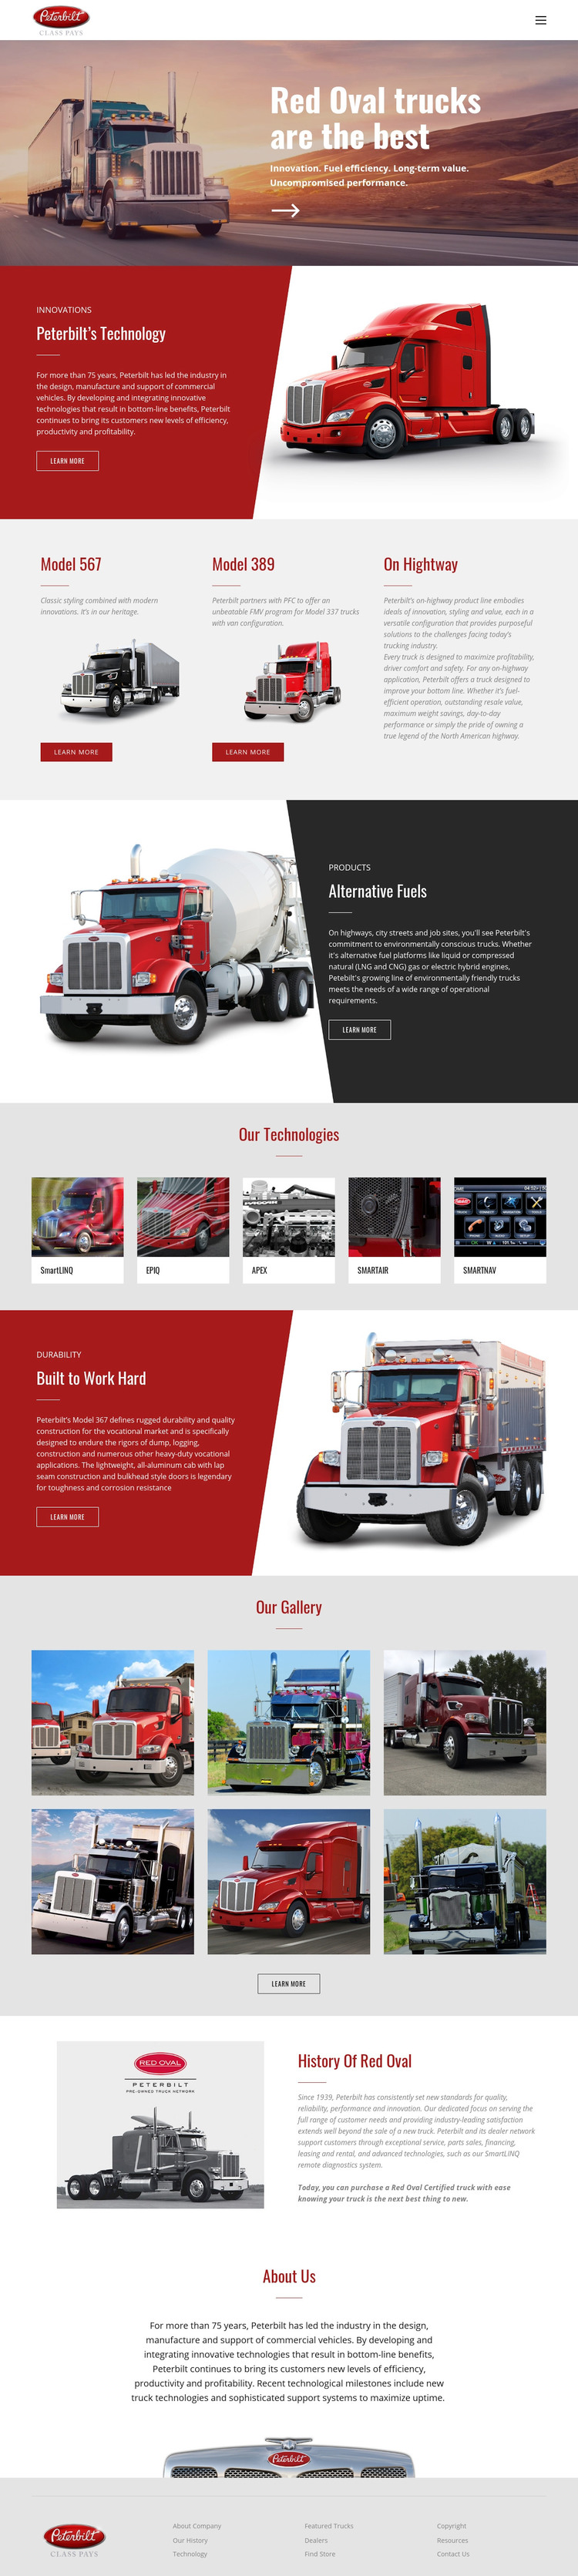 Red oval truck transportaion Elementor Template Alternative